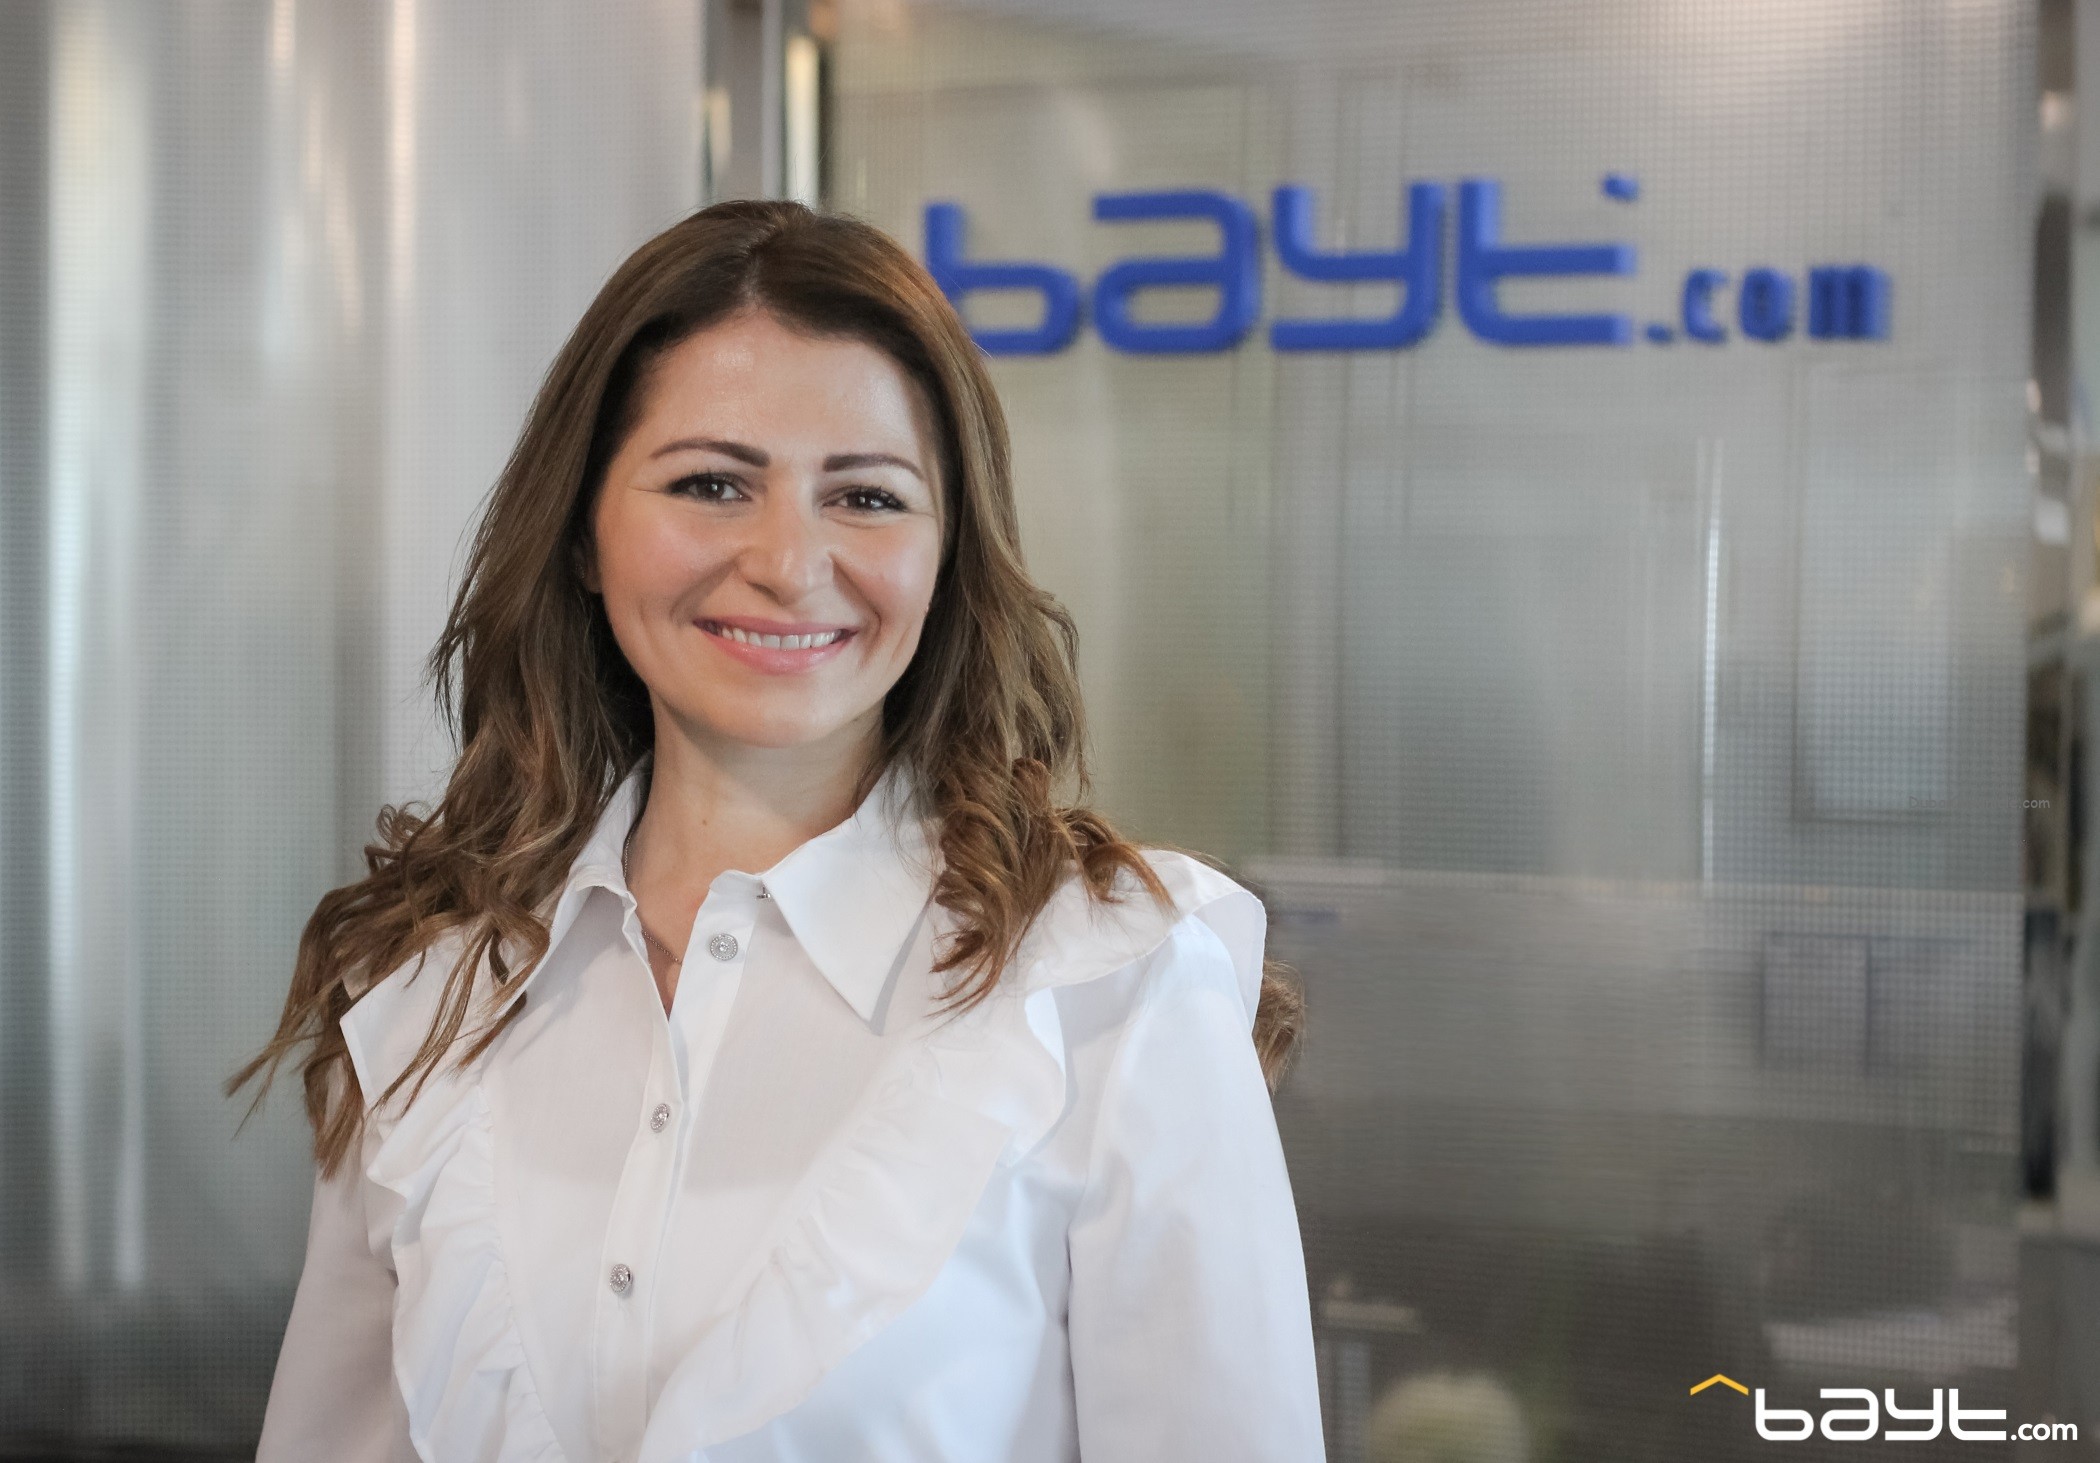 The 2022 Fresh Graduates in the MENA Survey by Bayt.com was conducted to help identify the most appealing industries to fresh graduates in the MENA region.